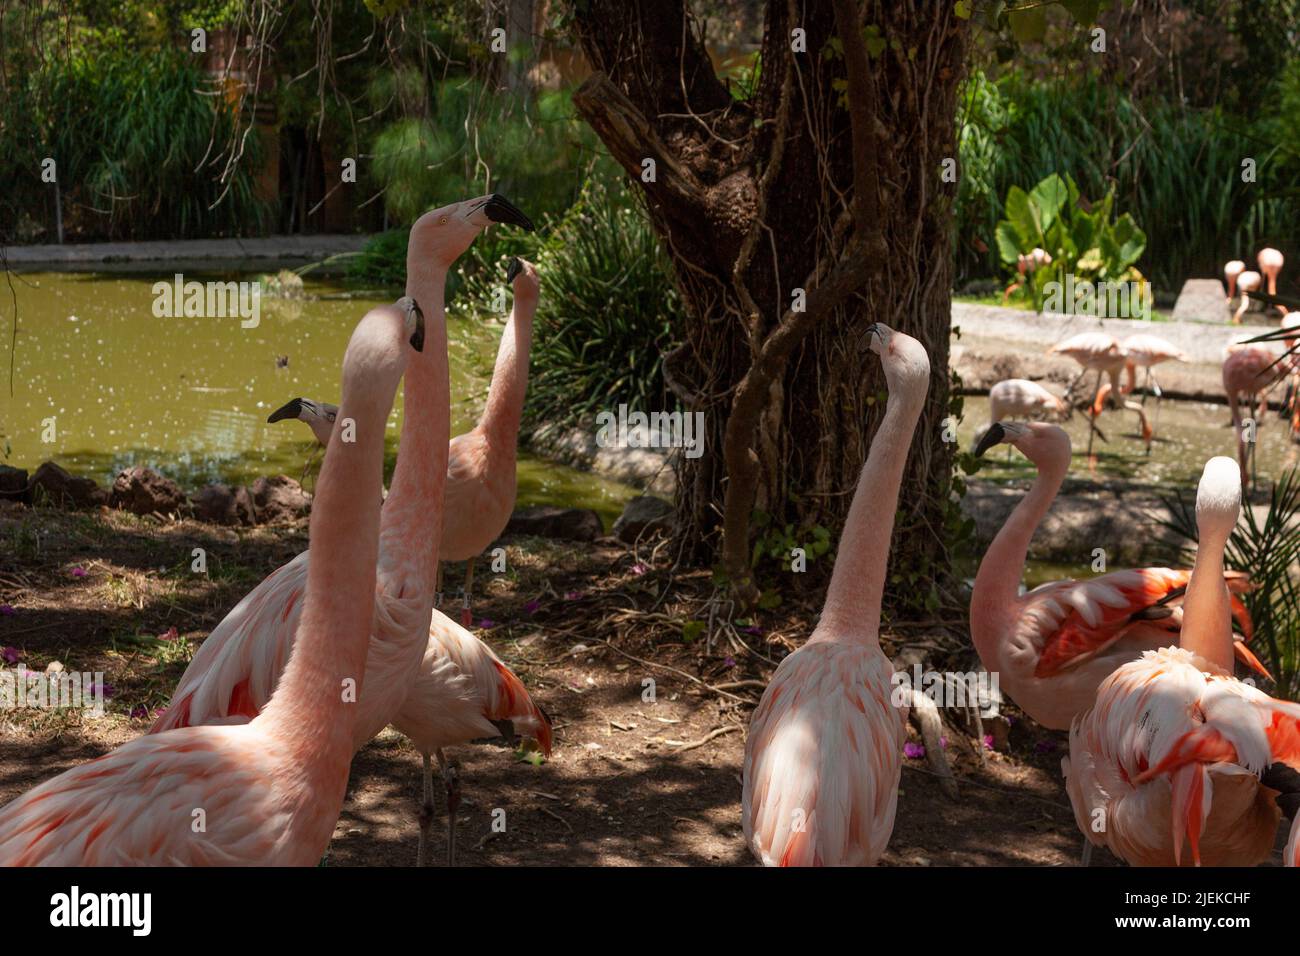 Flock of Flamingos under the shade of the trees scientific name: Phoenicopterus chileni exotic animal with pink feathers Stock Photo